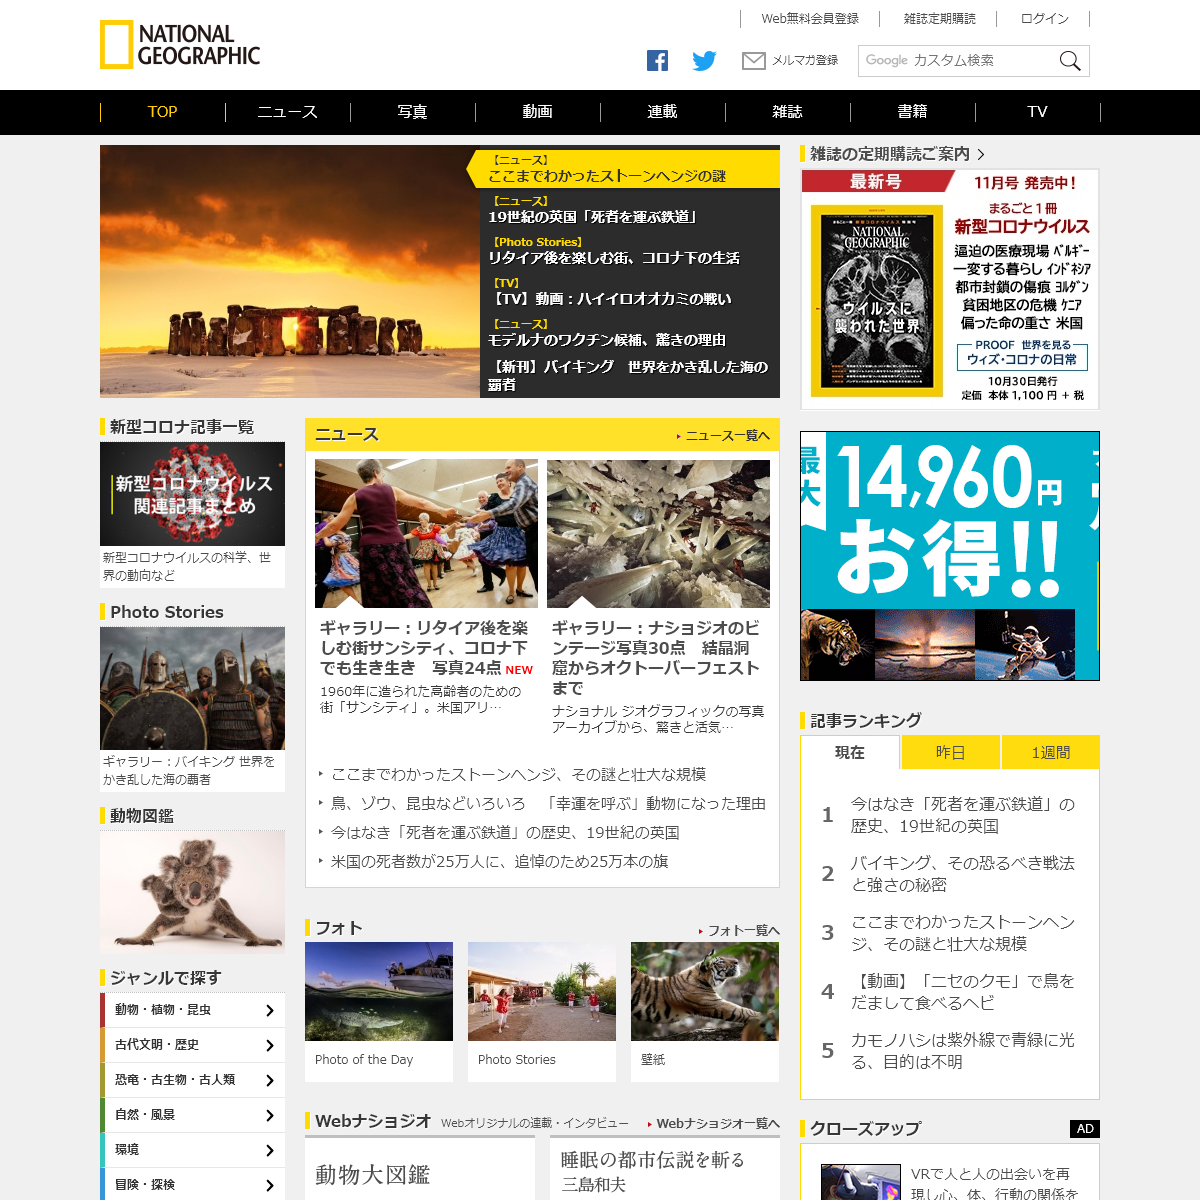 A complete backup of nationalgeographic.jp